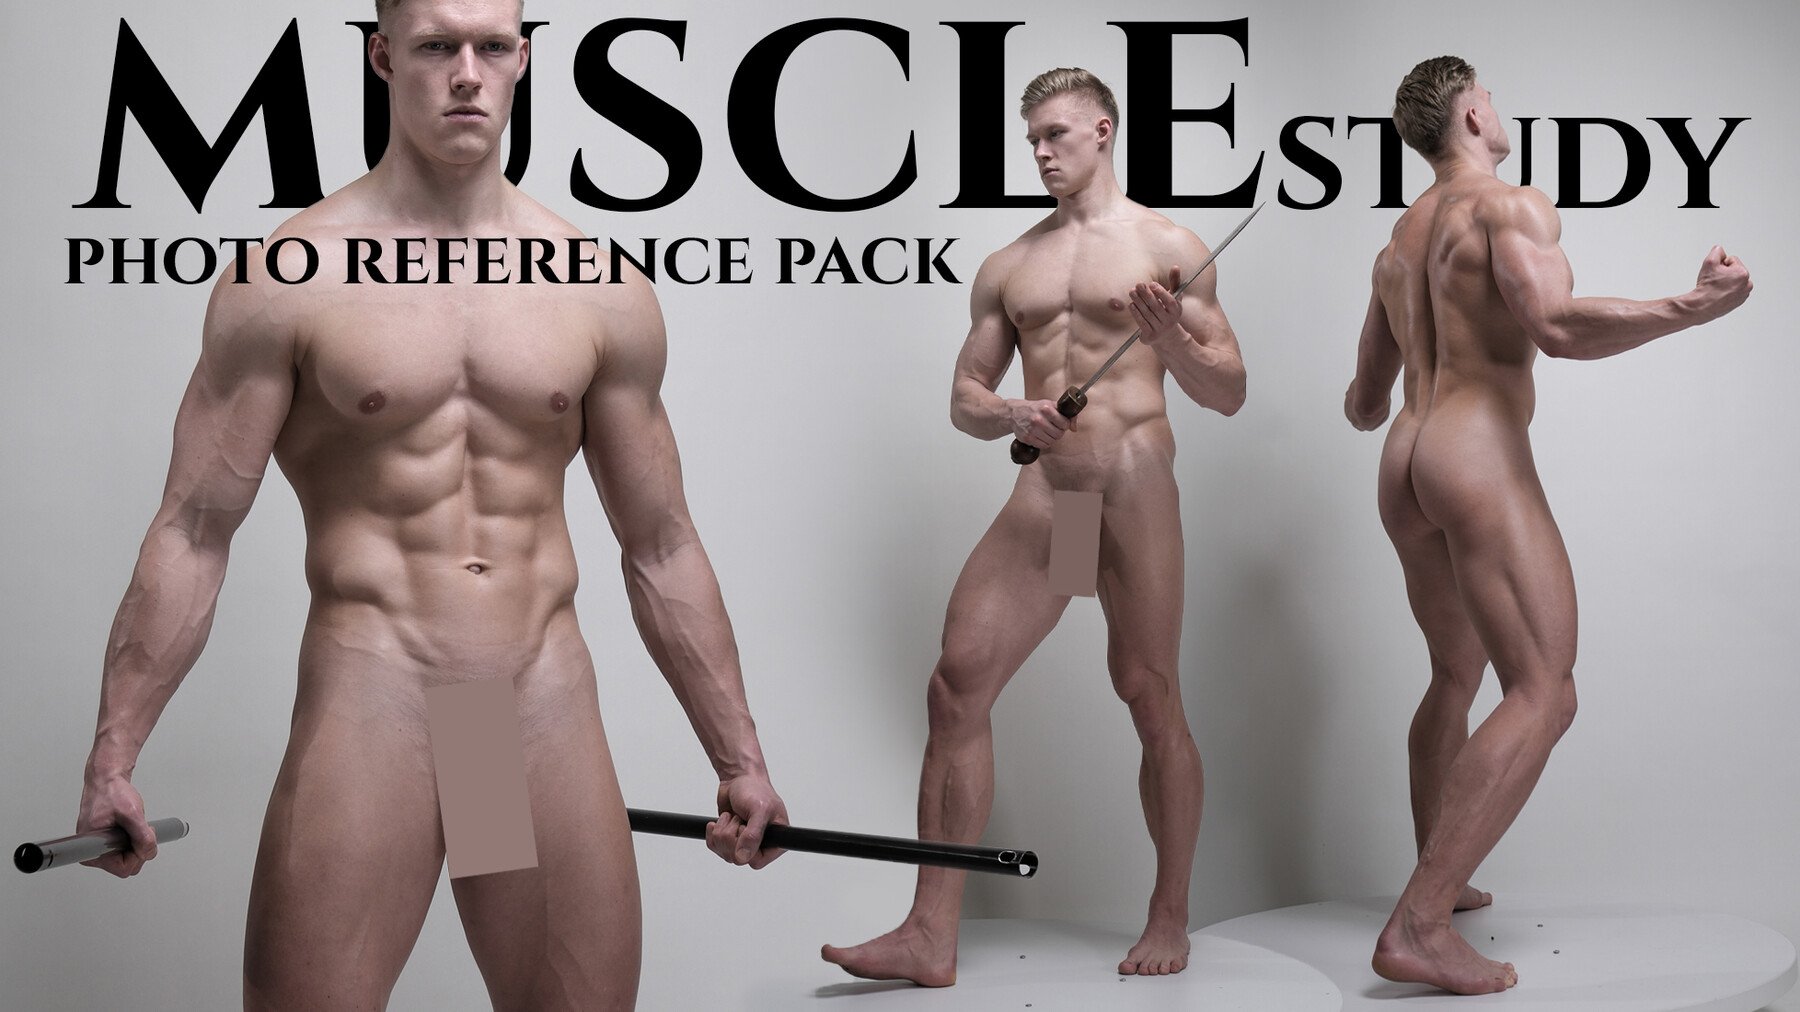 Muscle Study - Photo Reference Pack For Artists 646 JPEGs